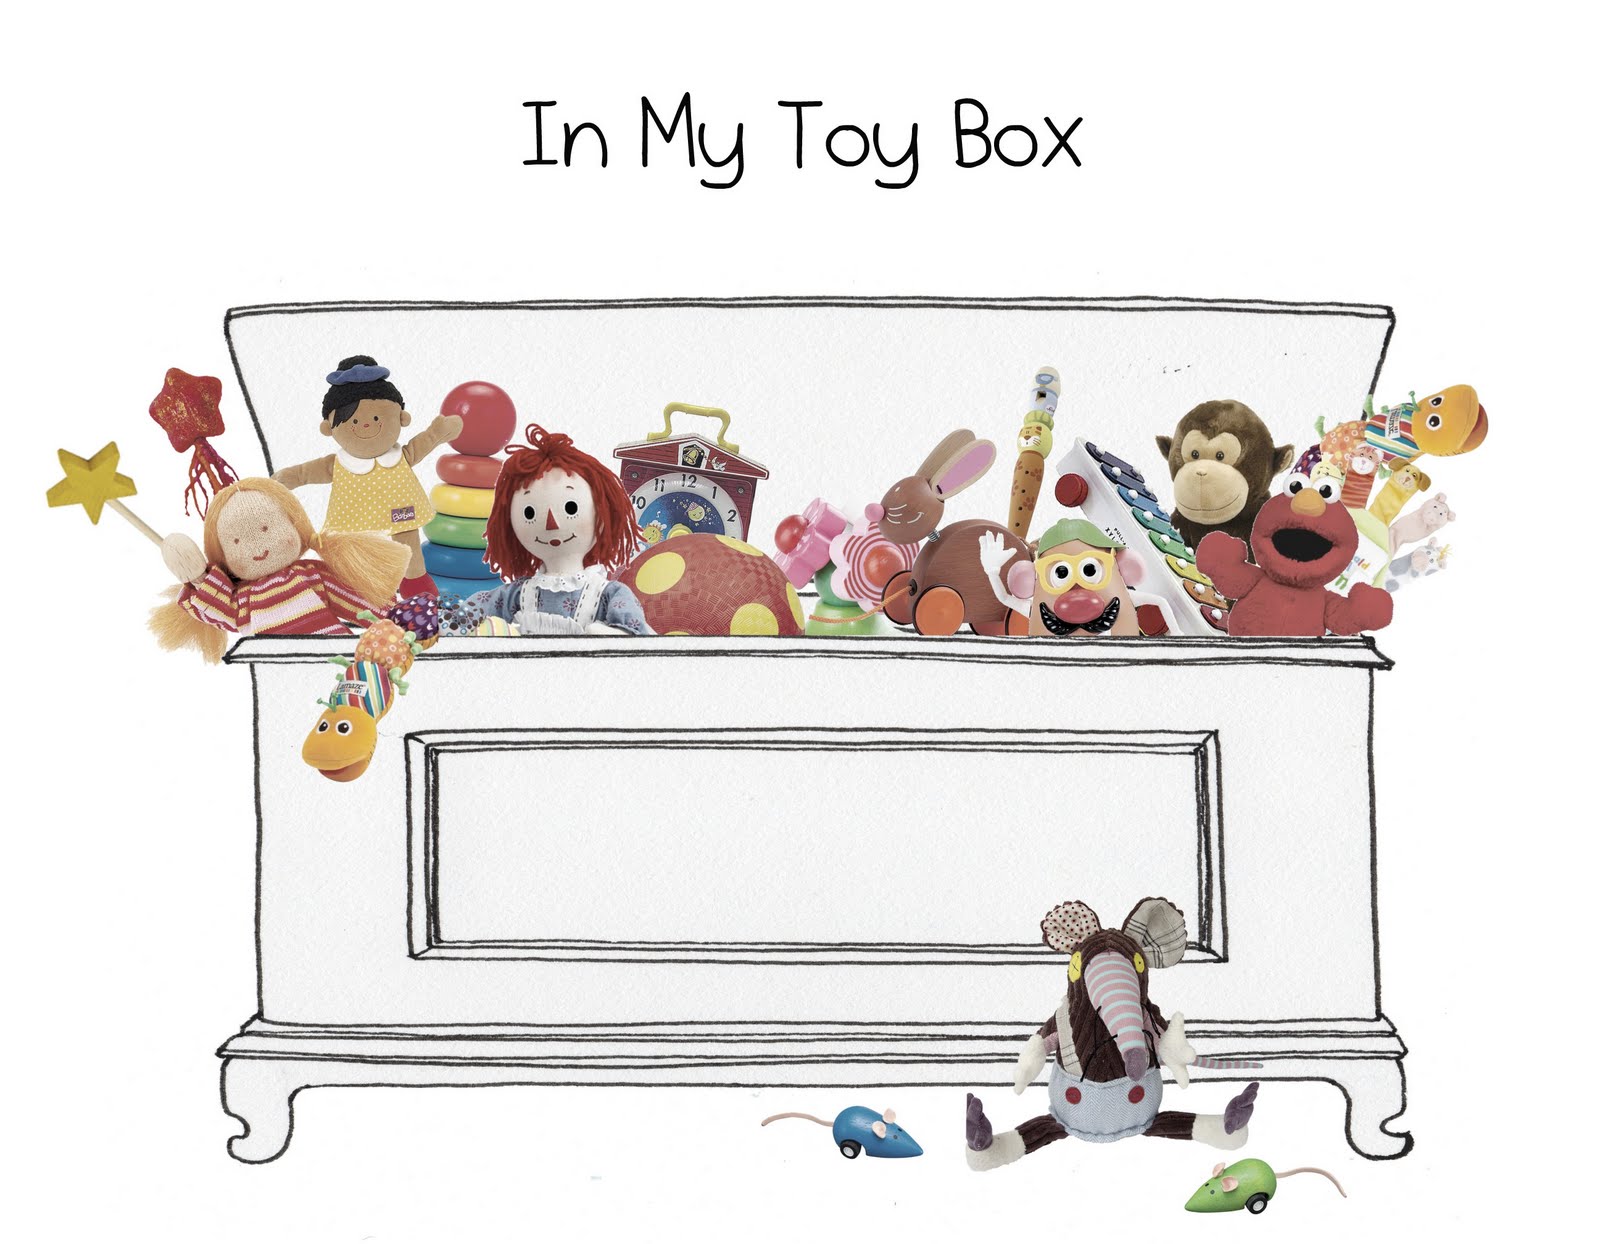 Toy Box Clip Art In My Toy Box